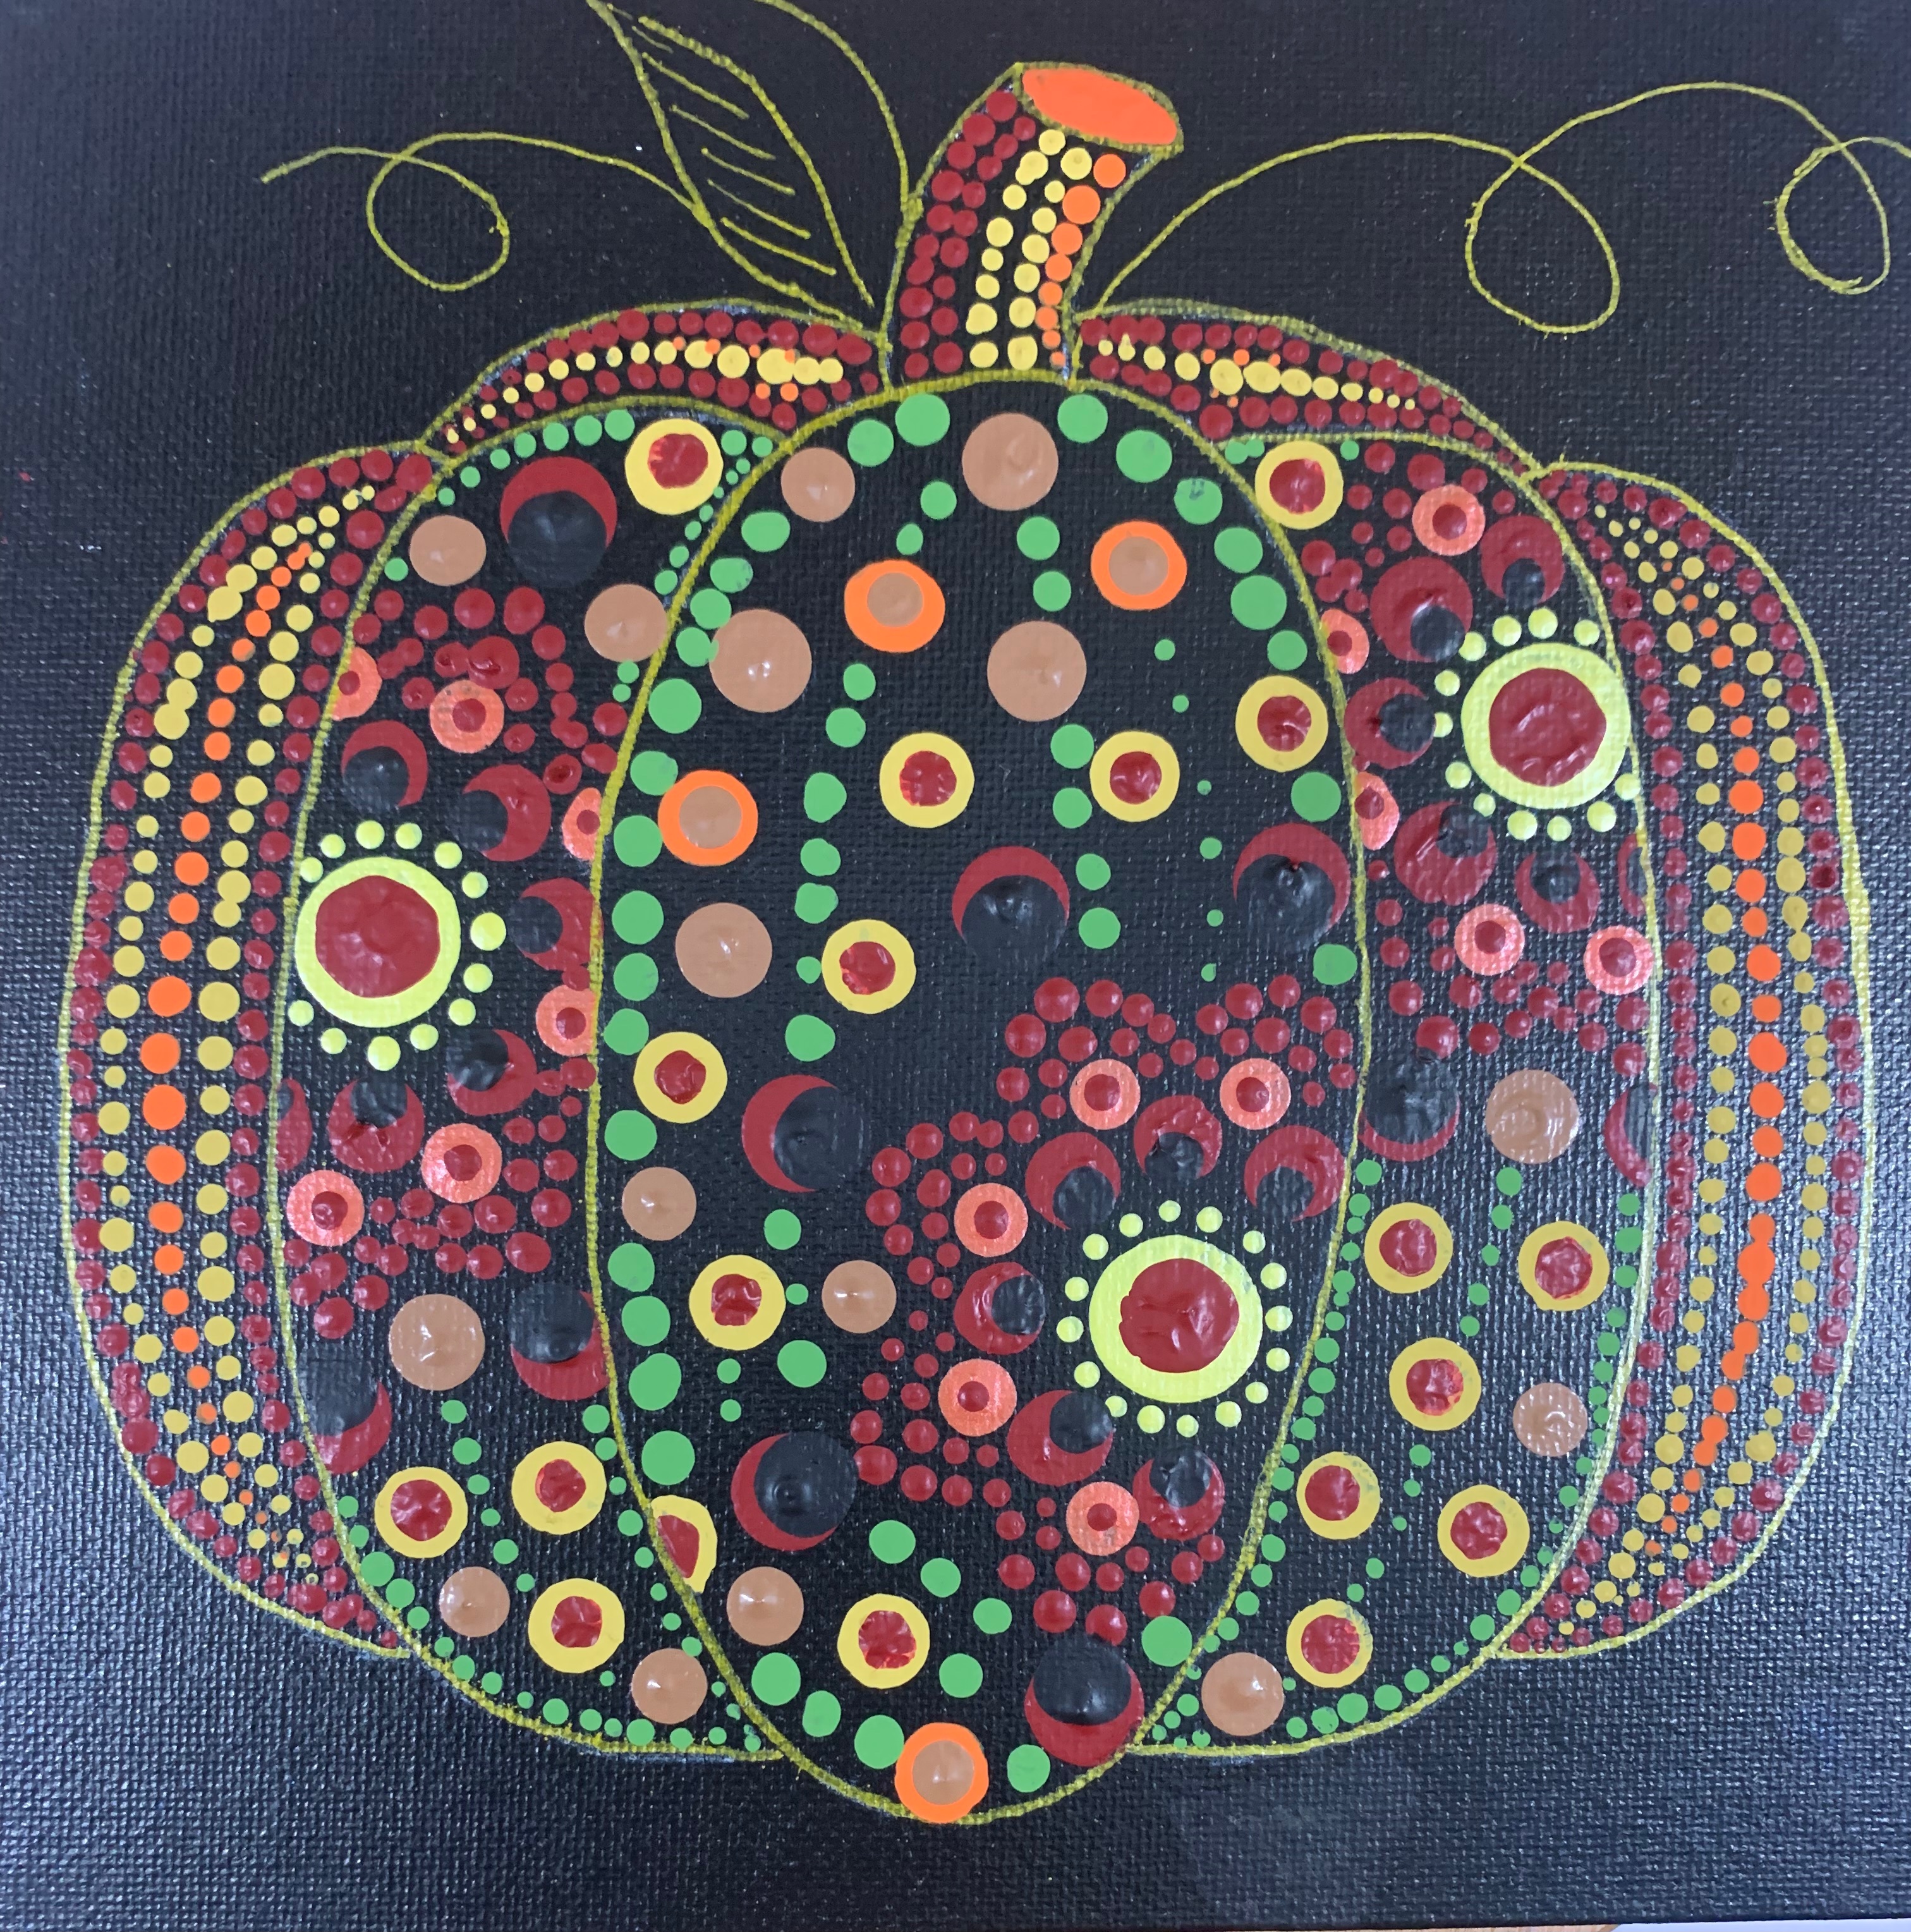 A Live with Livy  Pumpkin Mandala experience project by Yaymaker